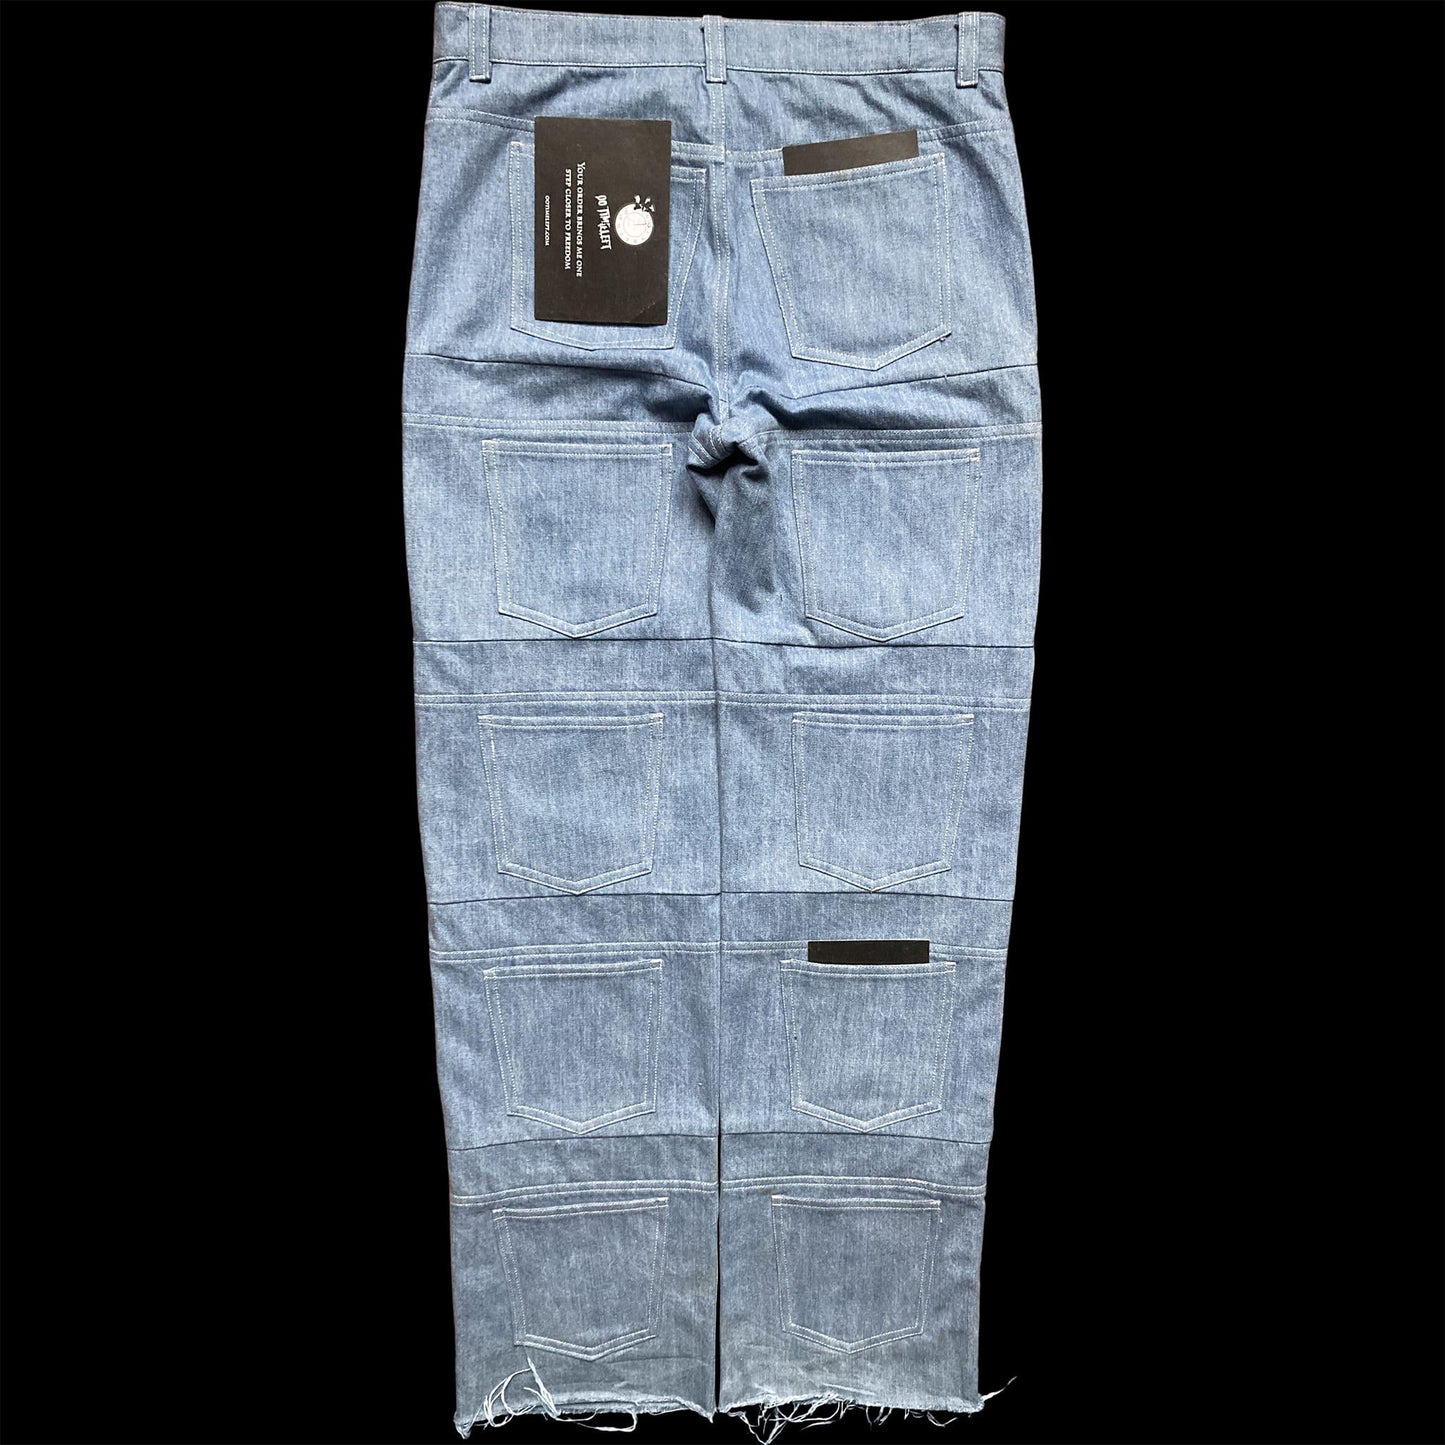 Back of the Unlimited Space Jeans handmade by 00timeleft